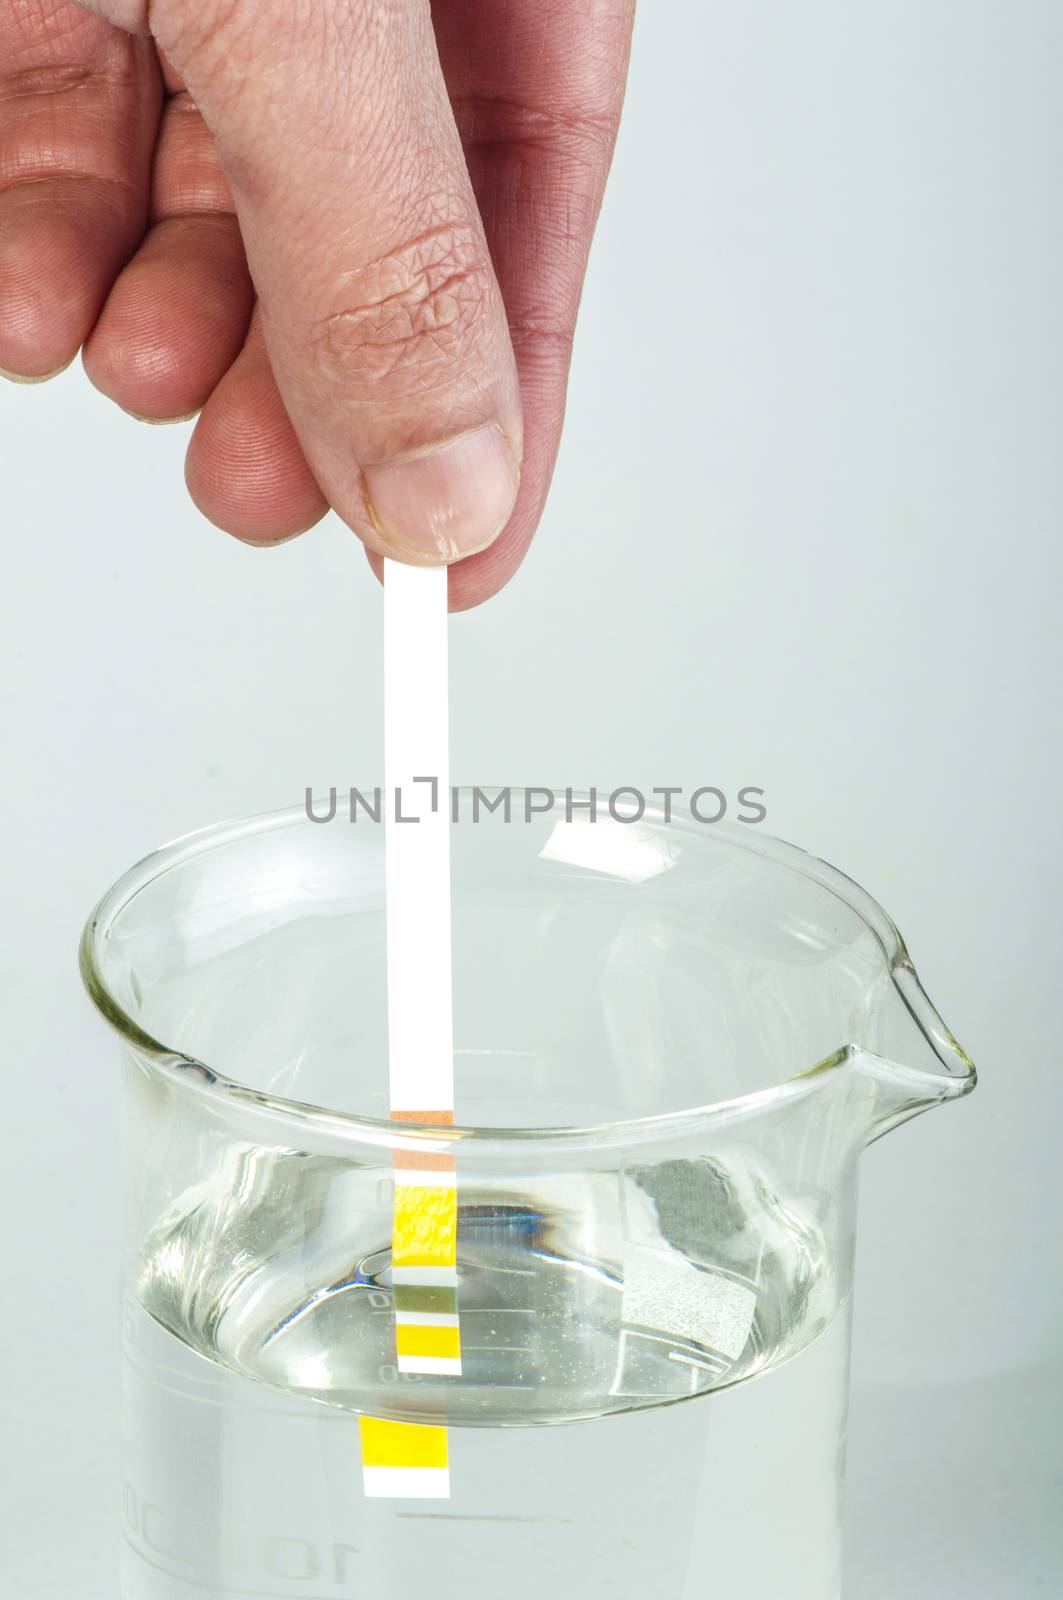 Litmus strips for measurement of acidity.Beaker with water